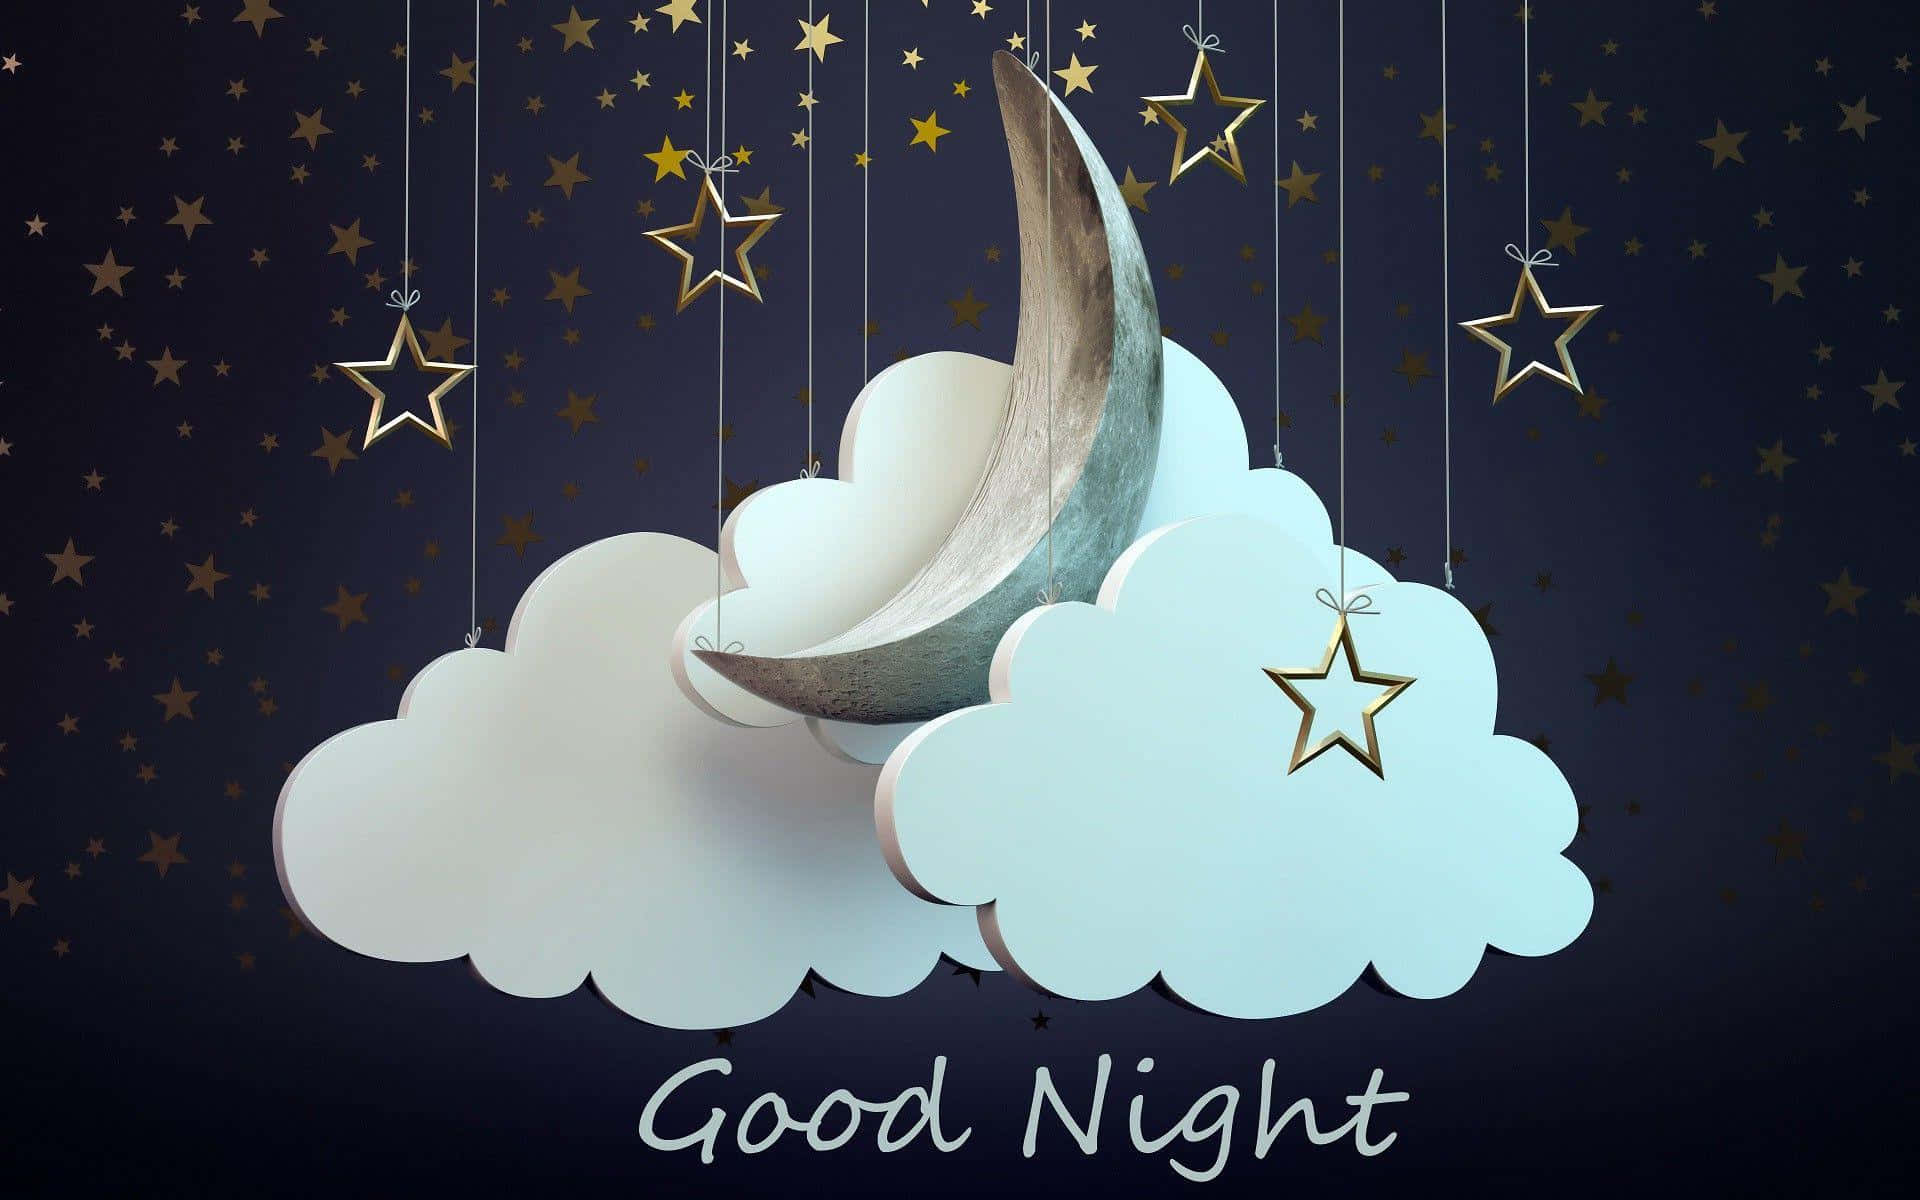 Goodnight Pictures Wallpaper